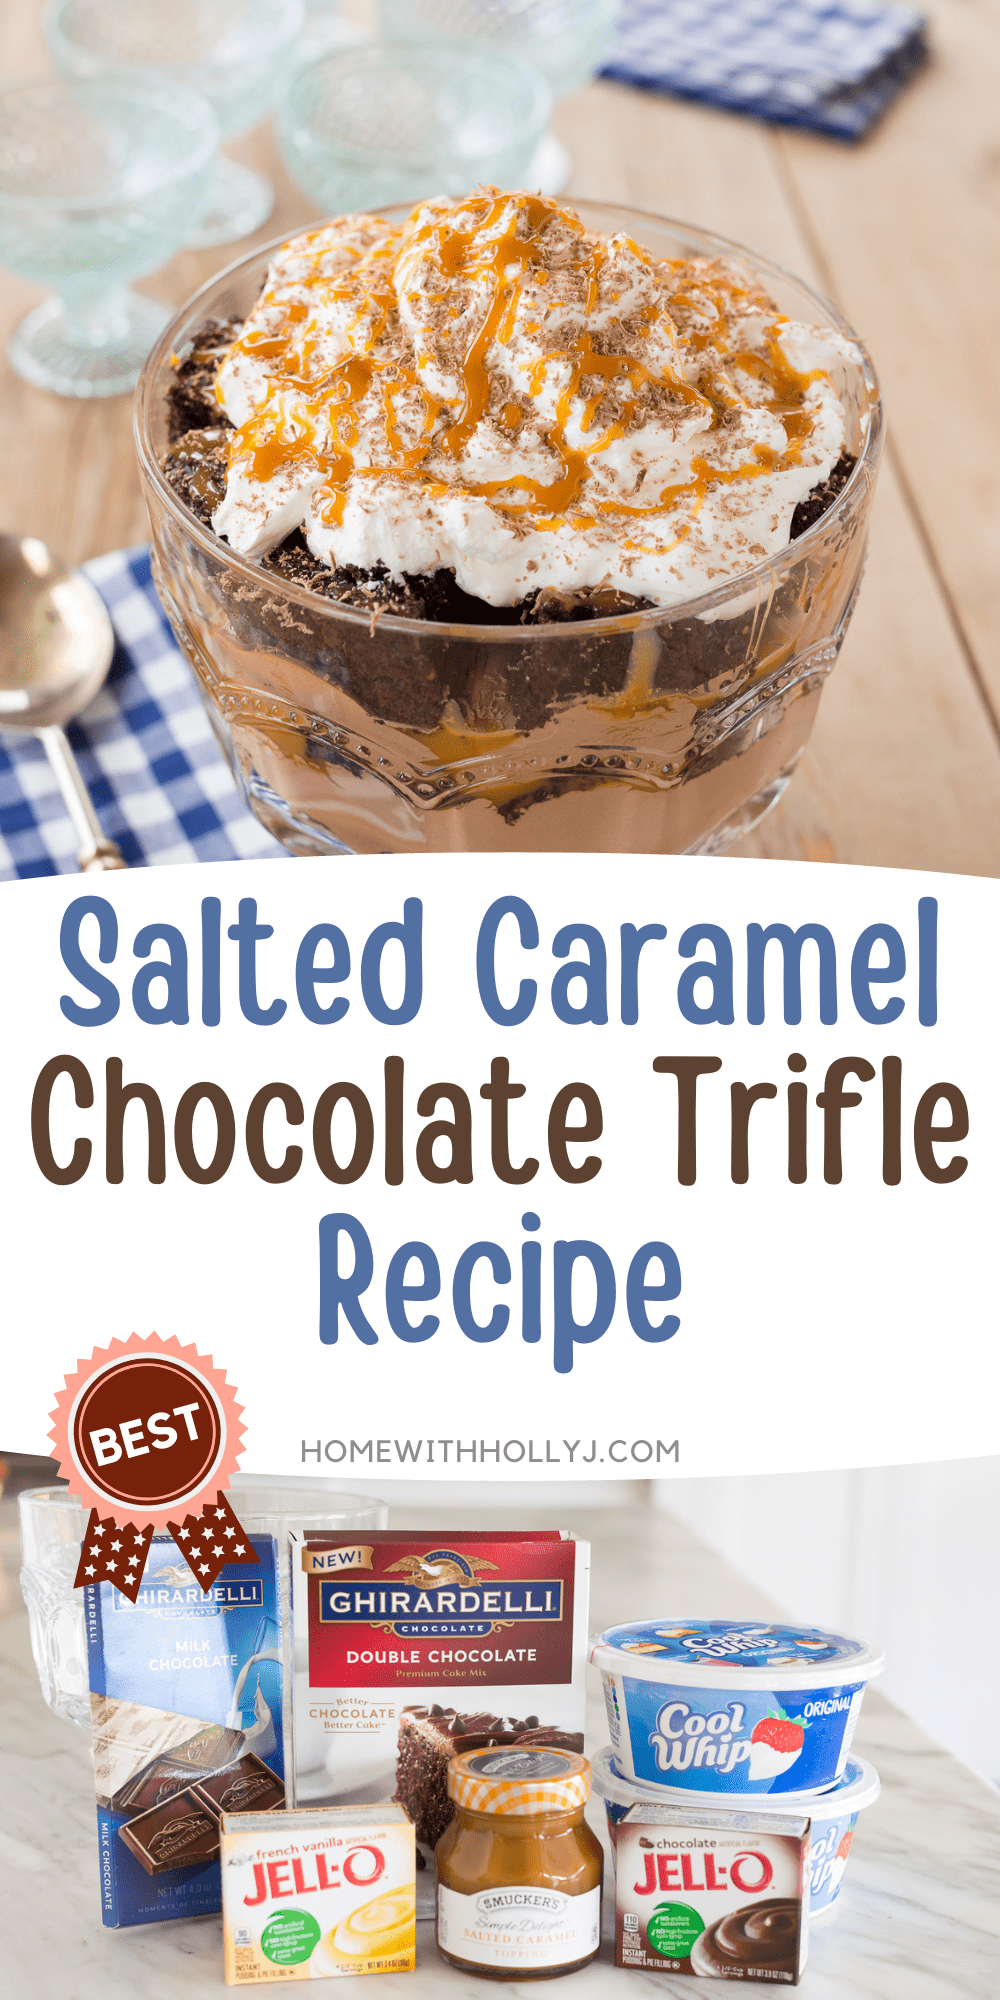 Satisfy your sweet tooth with this delicious and easy to make salted caramel chocolate trifle recipe. Follow our simple instructions here.